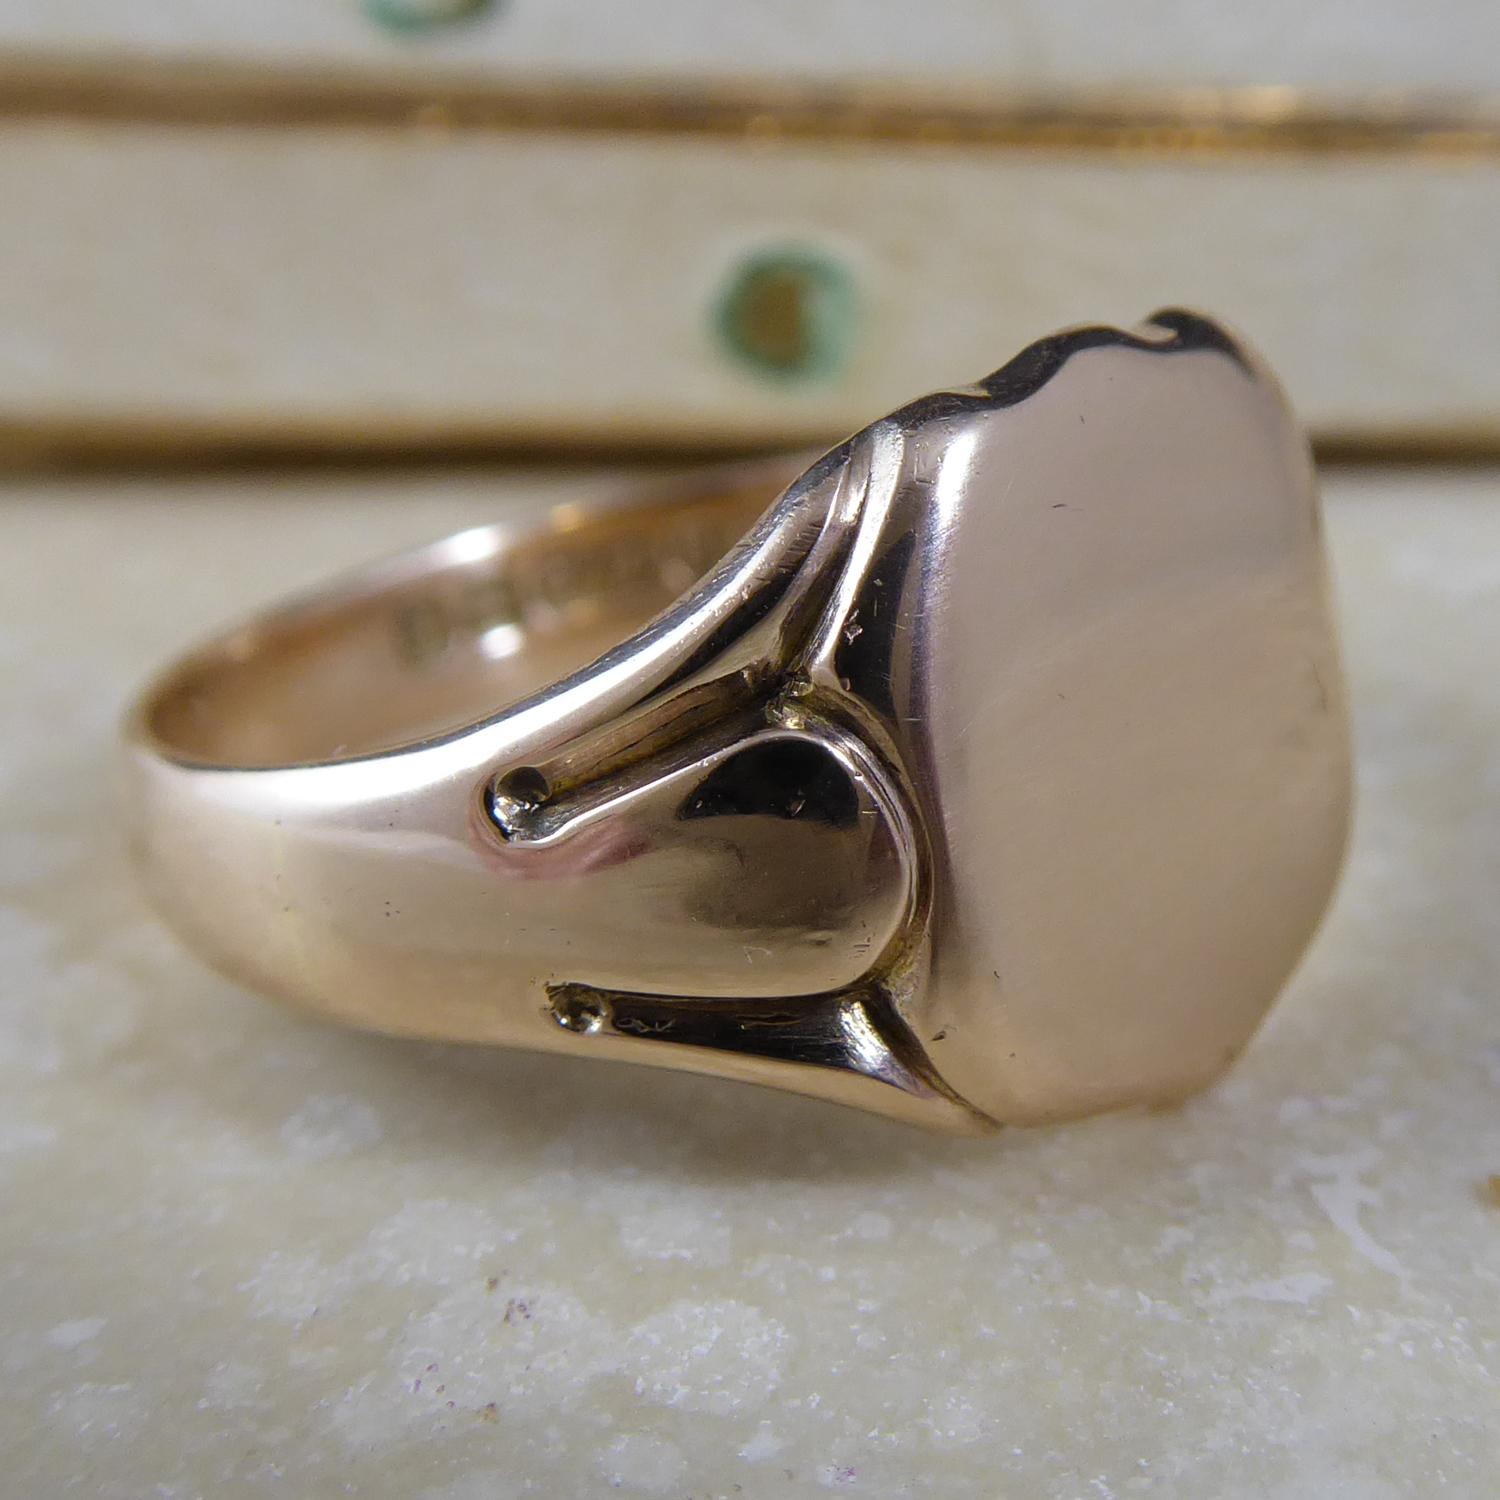 Fabulous antique gent's signet ring crafted inn 9ct rose gold in 1916.  The head of the ring is a plain polished shield shape to carved shoulders and D shaped cross section band.  Hallmarked at the Birmingham Assay Office.  Finger size 10